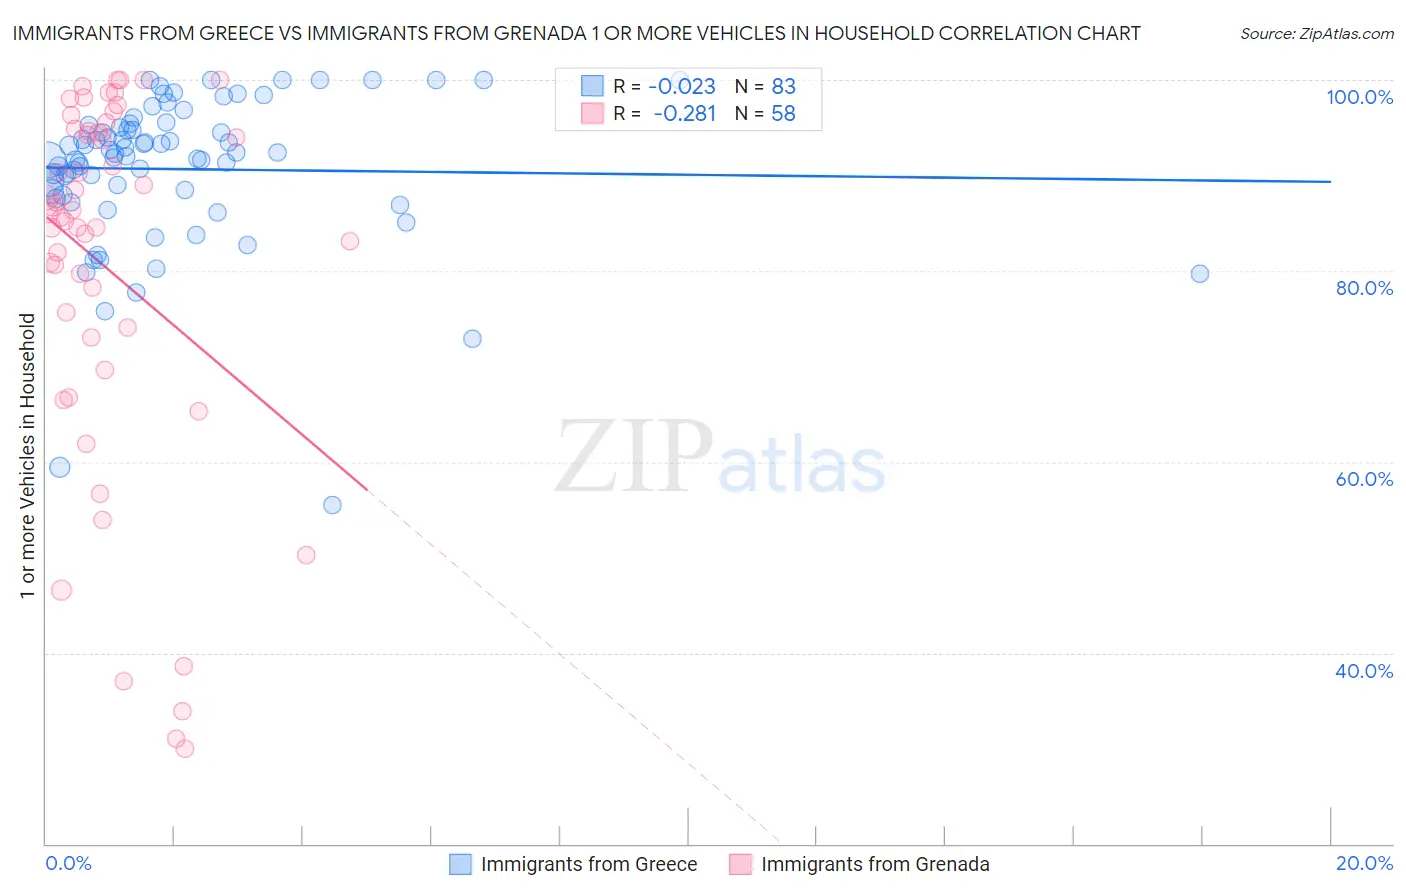 Immigrants from Greece vs Immigrants from Grenada 1 or more Vehicles in Household